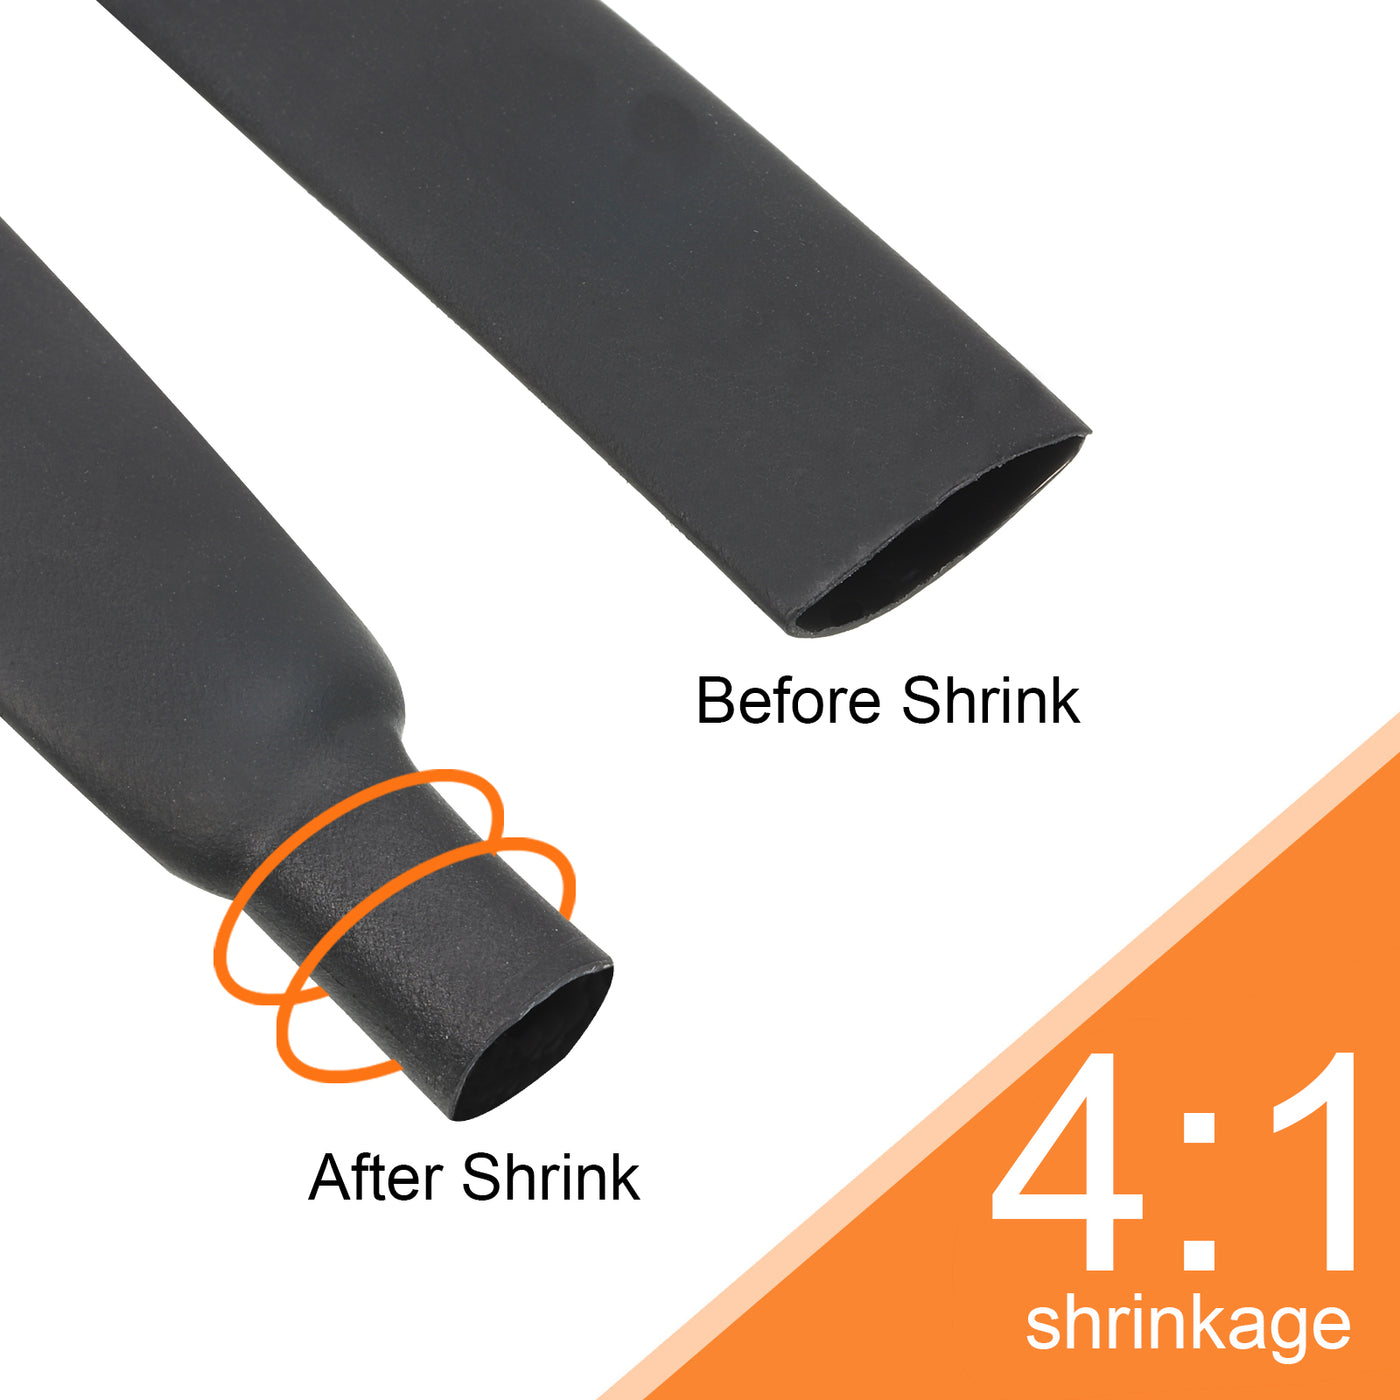 Harfington 18mm Dia 50ft Heat Shrink Tubing 4:1 Dual Wall Adhesive Lined Marine Waterproof Shrink Tube for Industrial Electrical Cable Wire Wrap